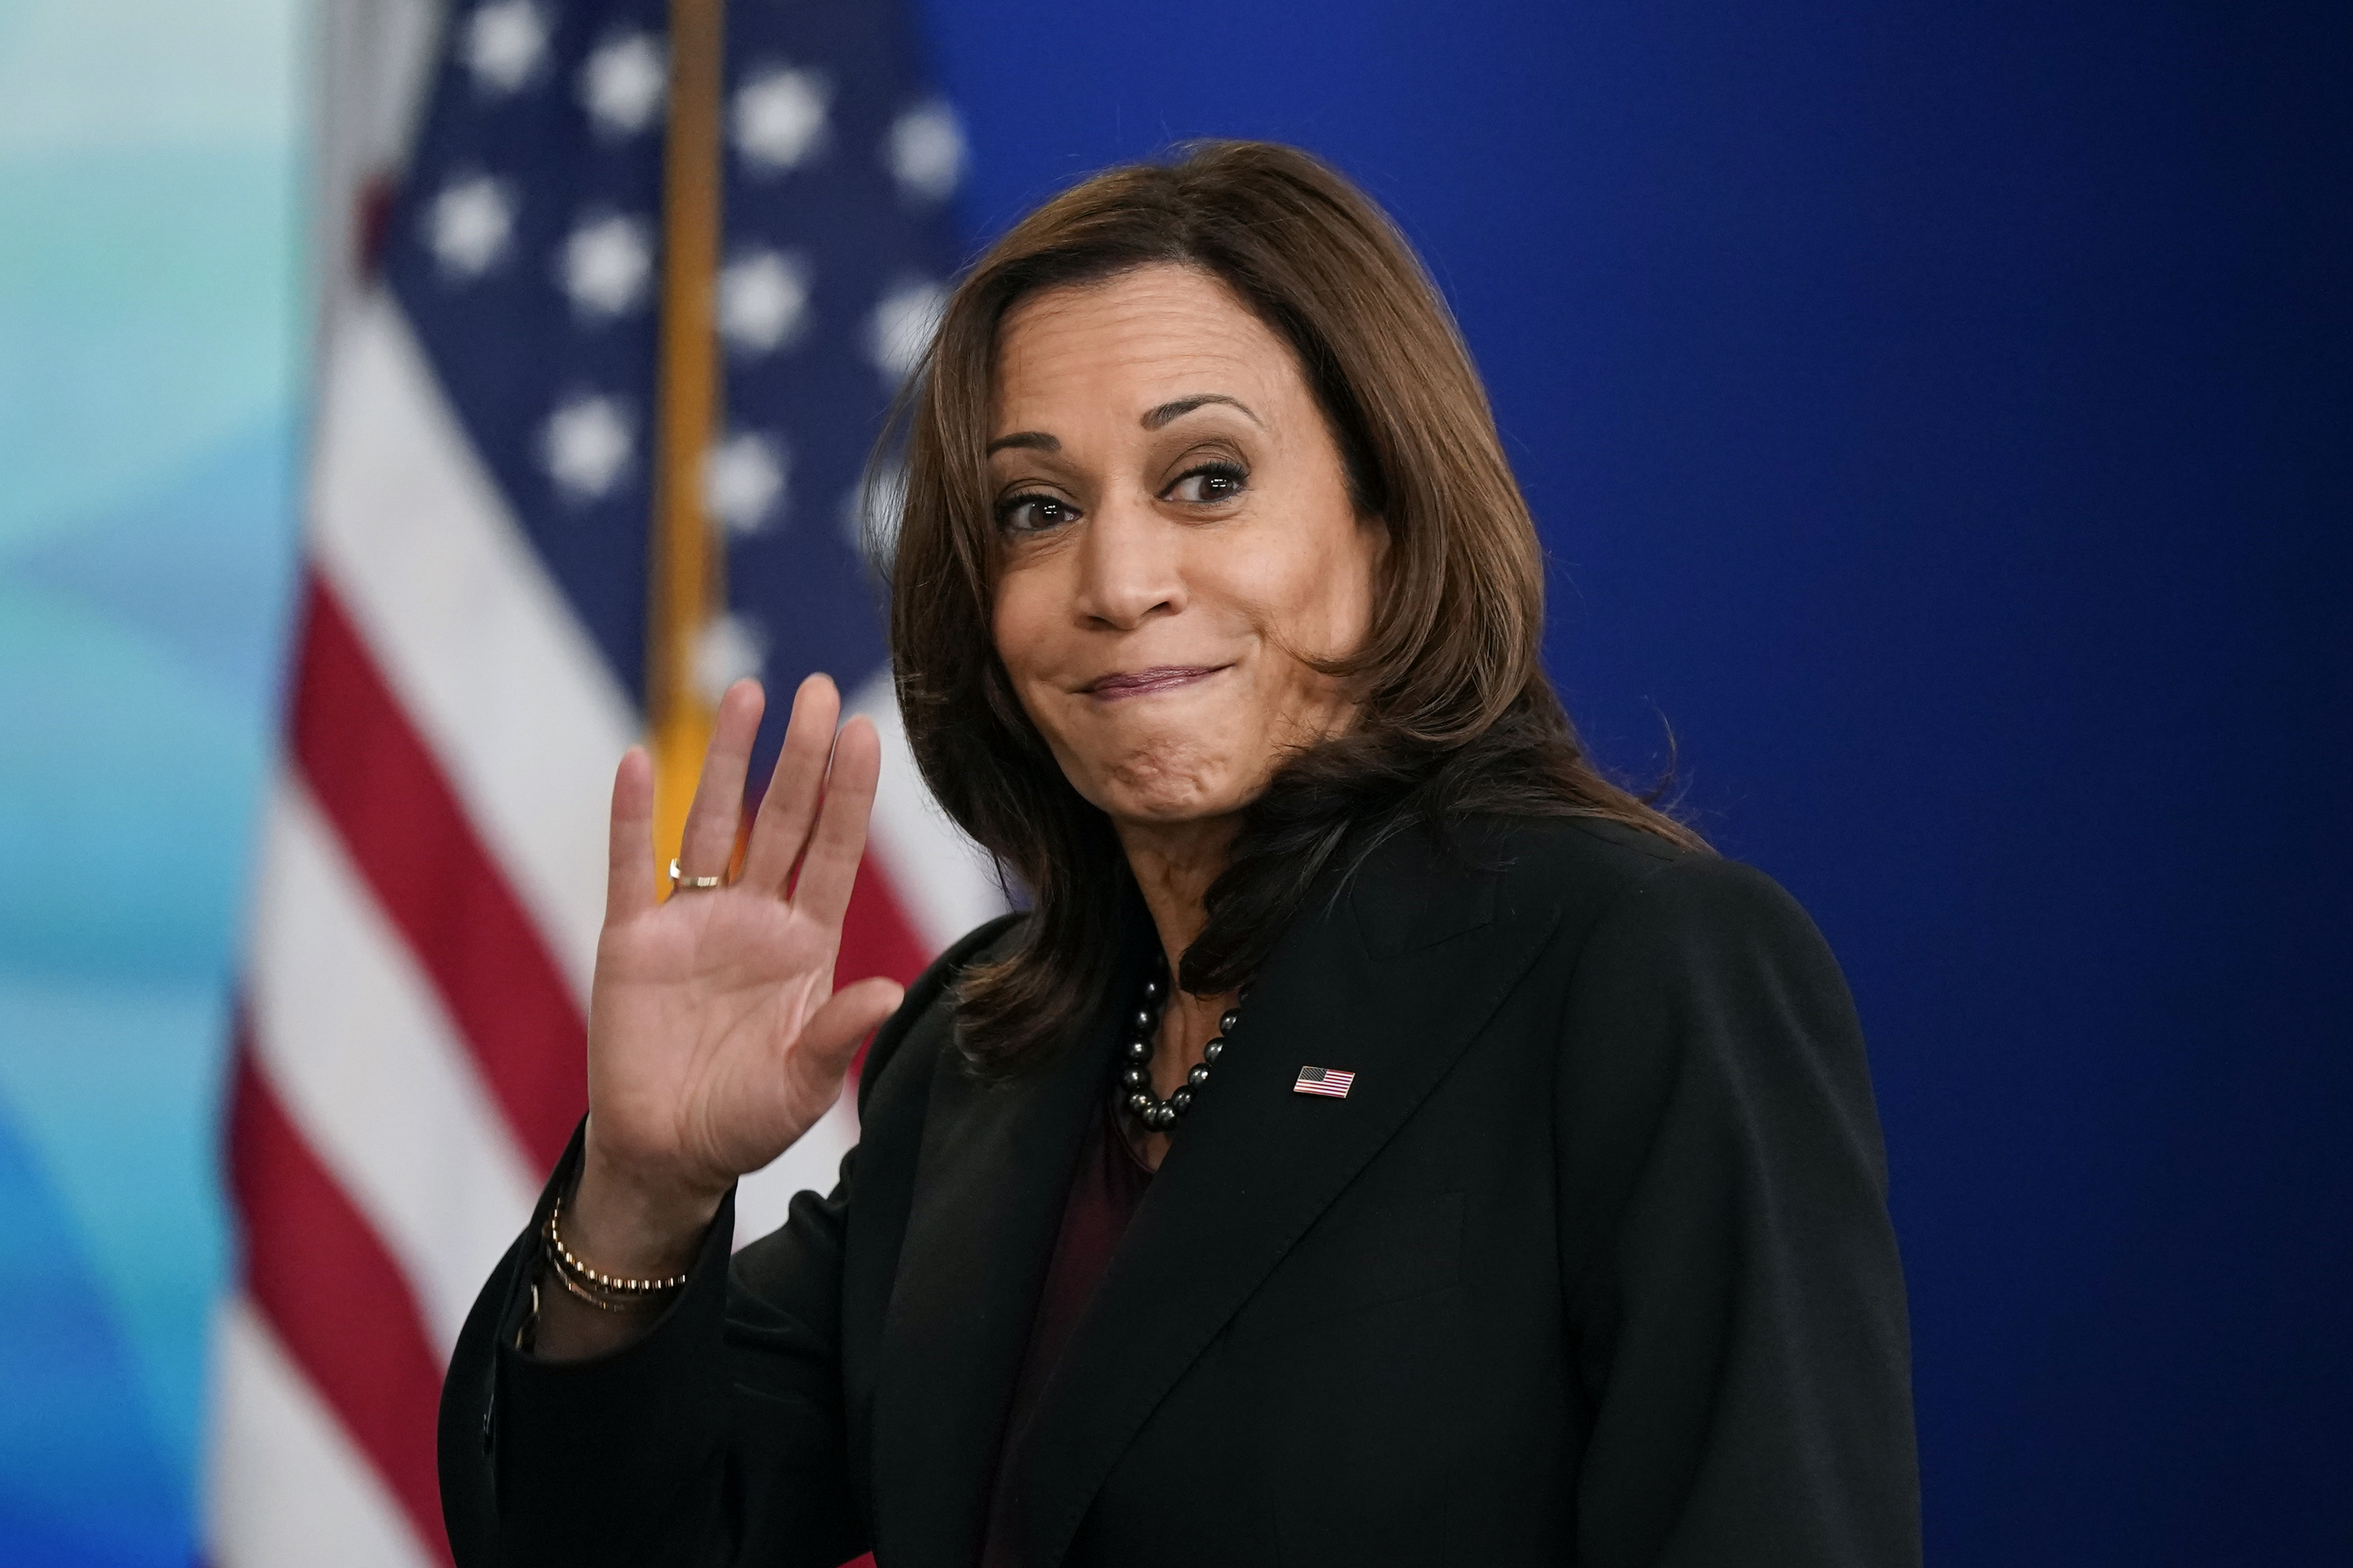 FILE - Vice President Kamala Harris waves as she departs after speaking at the Tribal Nations Summit in the South Court Auditorium on the White House campus, Nov. 16, 2021, in Washington. Harris has been the White House's first line of defense after President Joe Biden's faltering performance in last week's debate with Donald Trump. (AP Photo/Patrick Semansky, File)